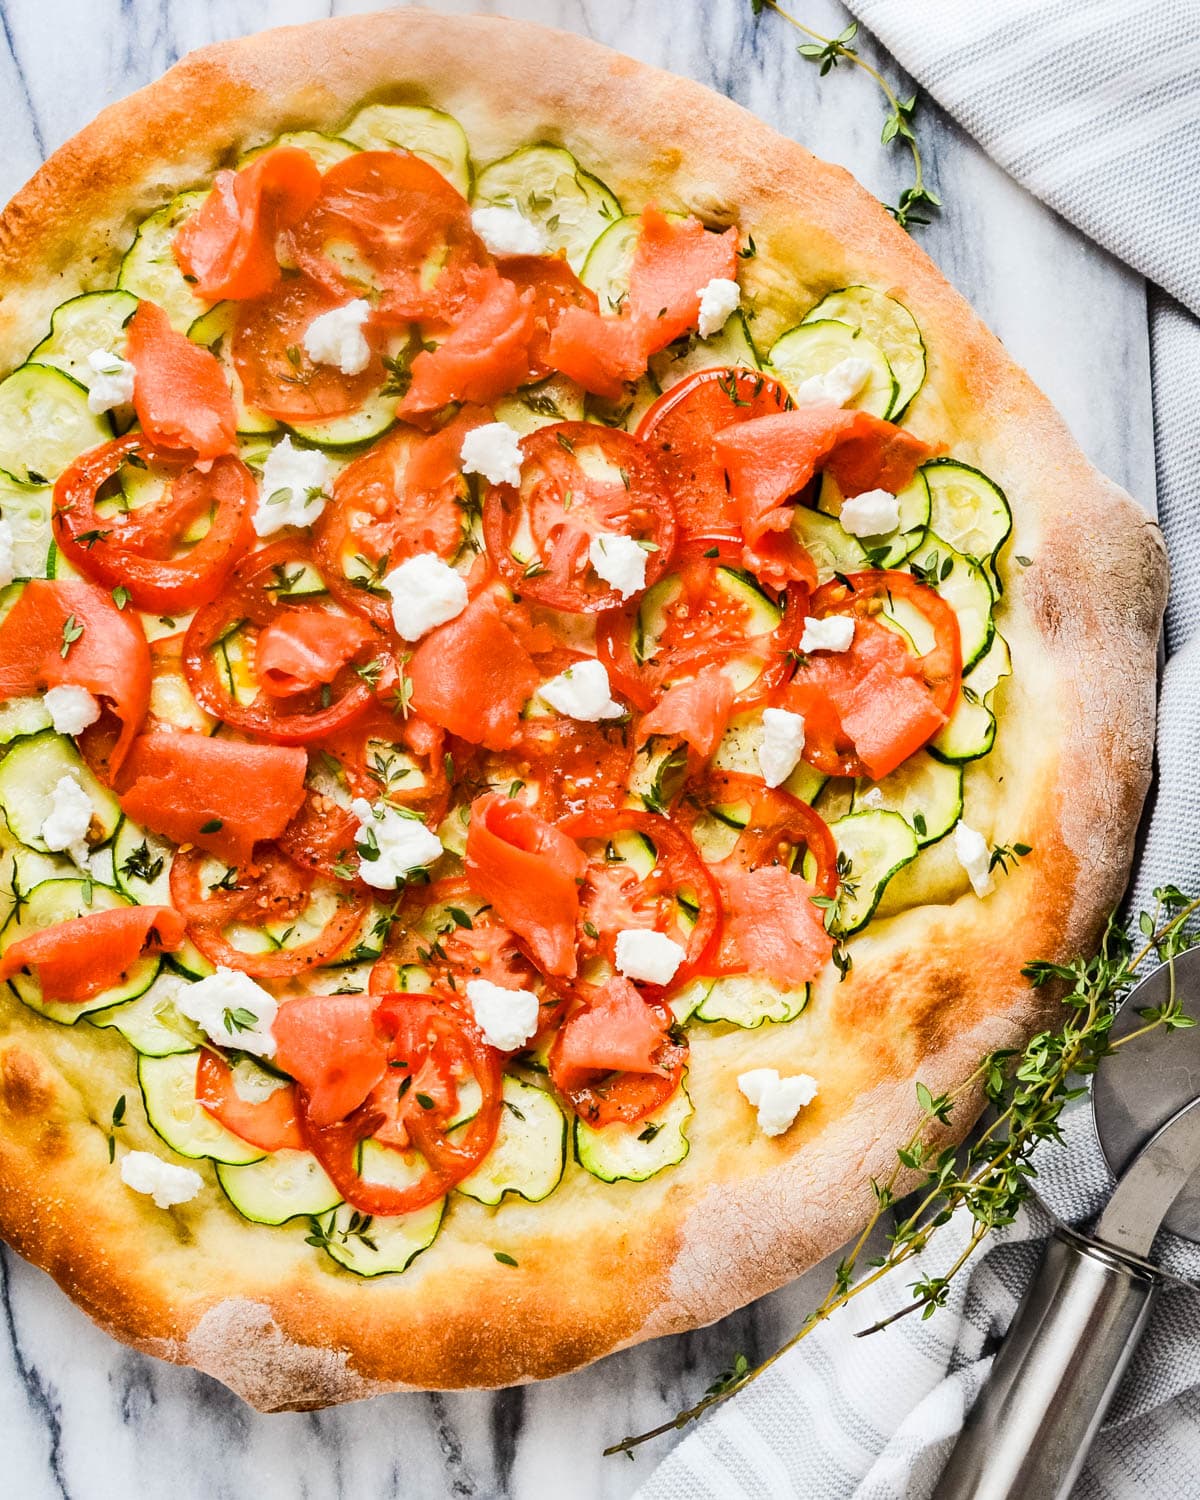 A smoked salmon pizza with thin slices of zucchini and goat cheese.